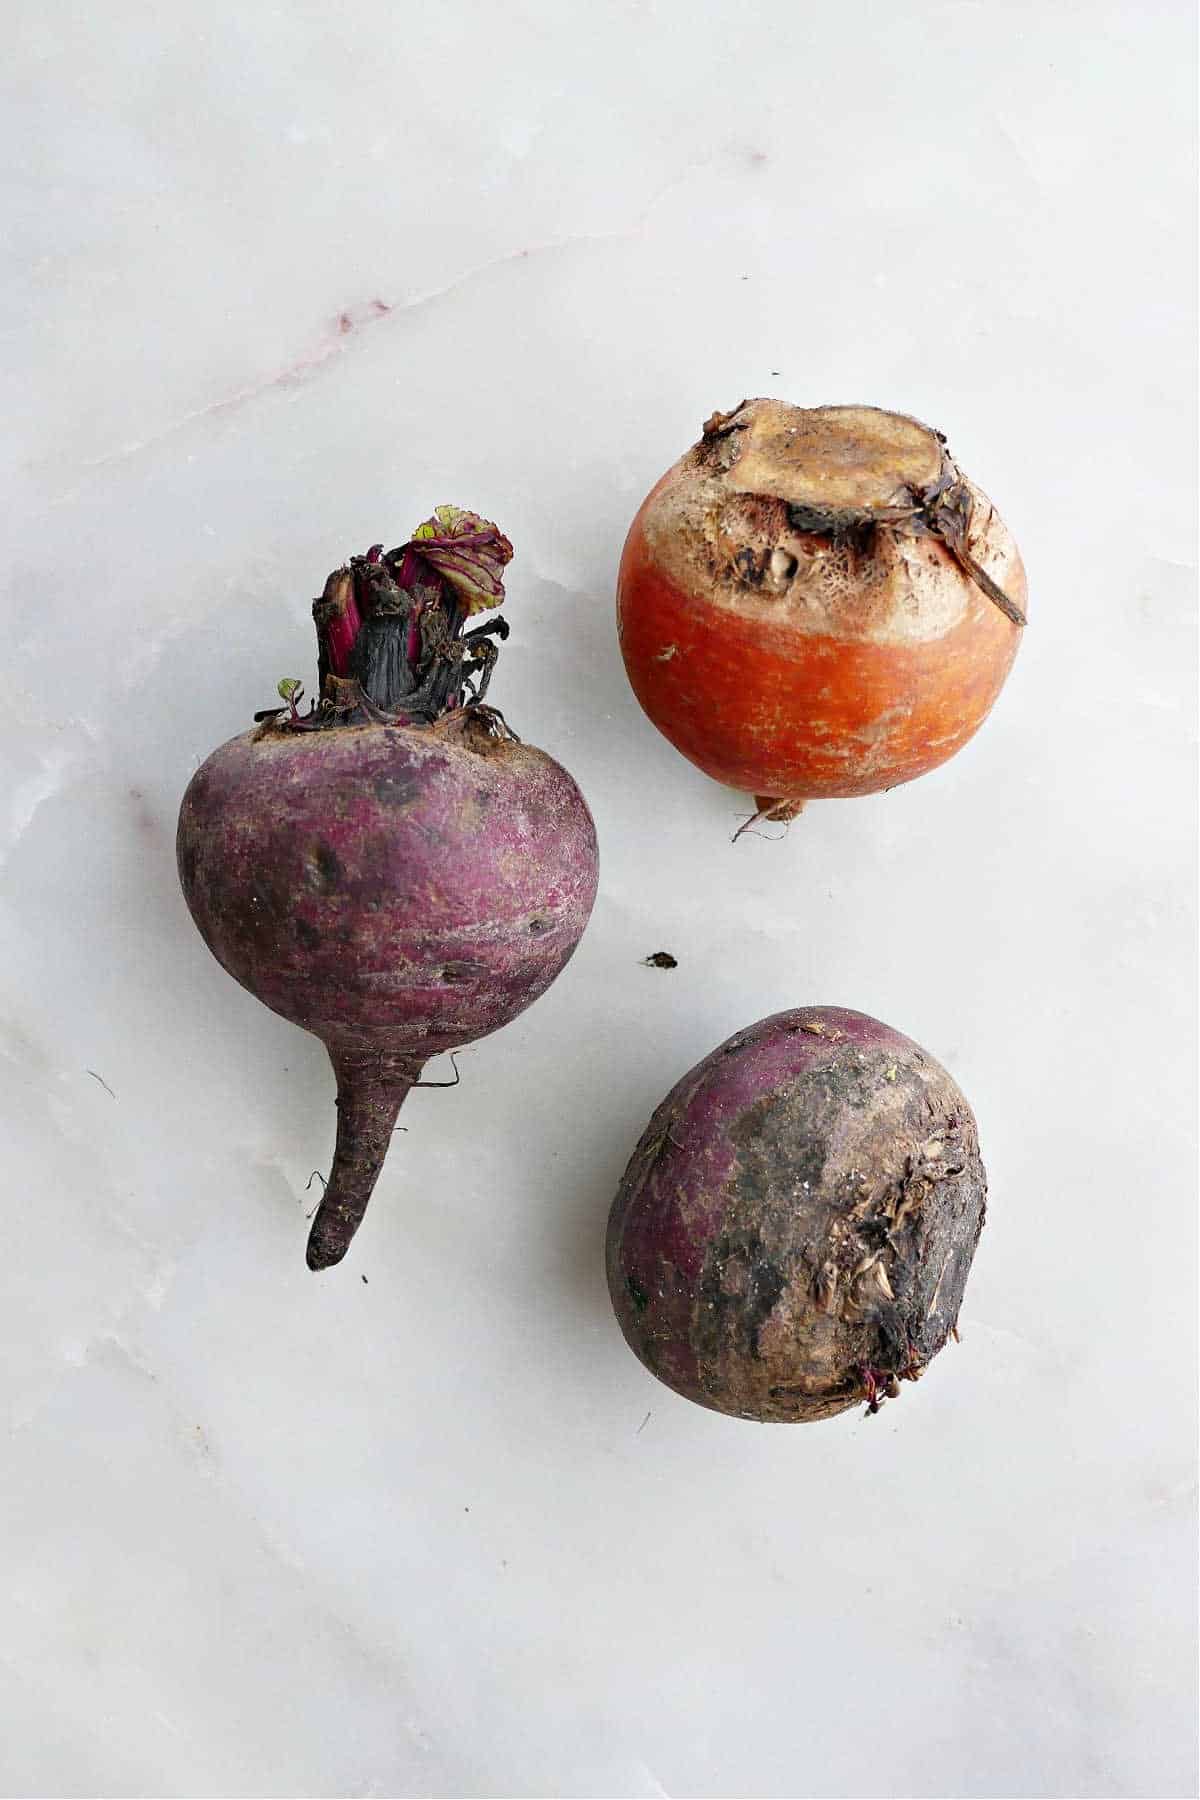 2 red beets and 1 golden beet next to each other on a counter